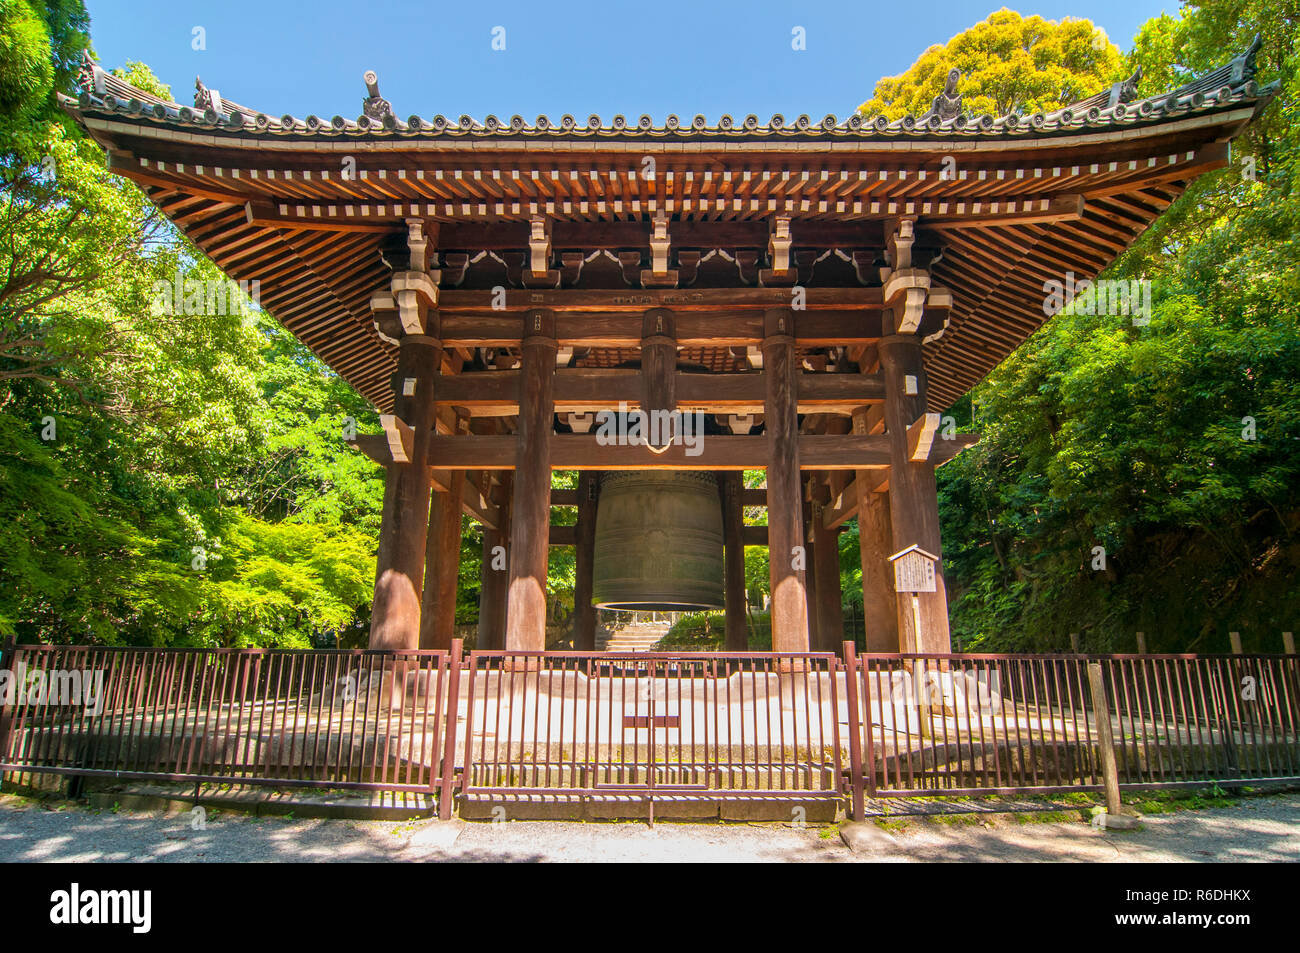 The Largest Bronze Bell In Japan Is This One At Chion-In Temple In The Higashiyama District Of Kyoto Stock Photo